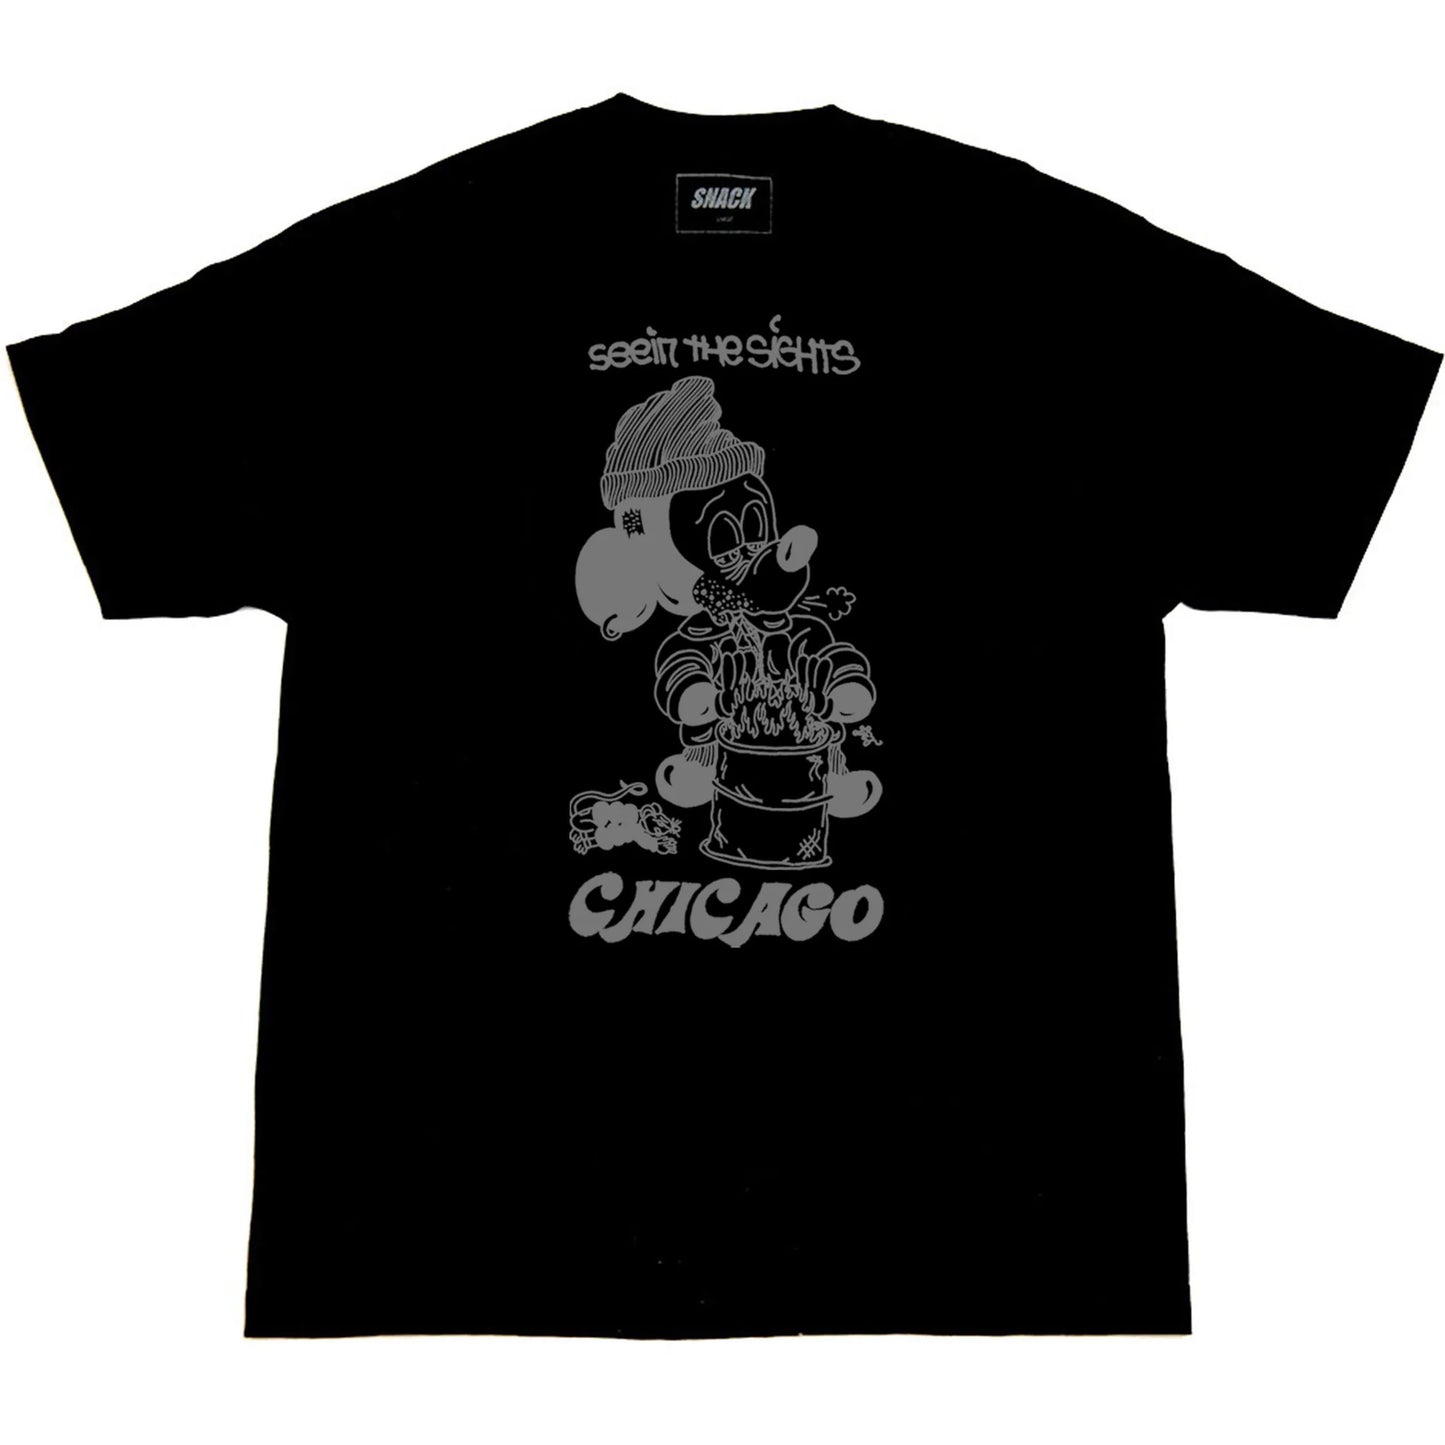 SNACK Seein The Sights Chicago Mens Tee - Black/Grey